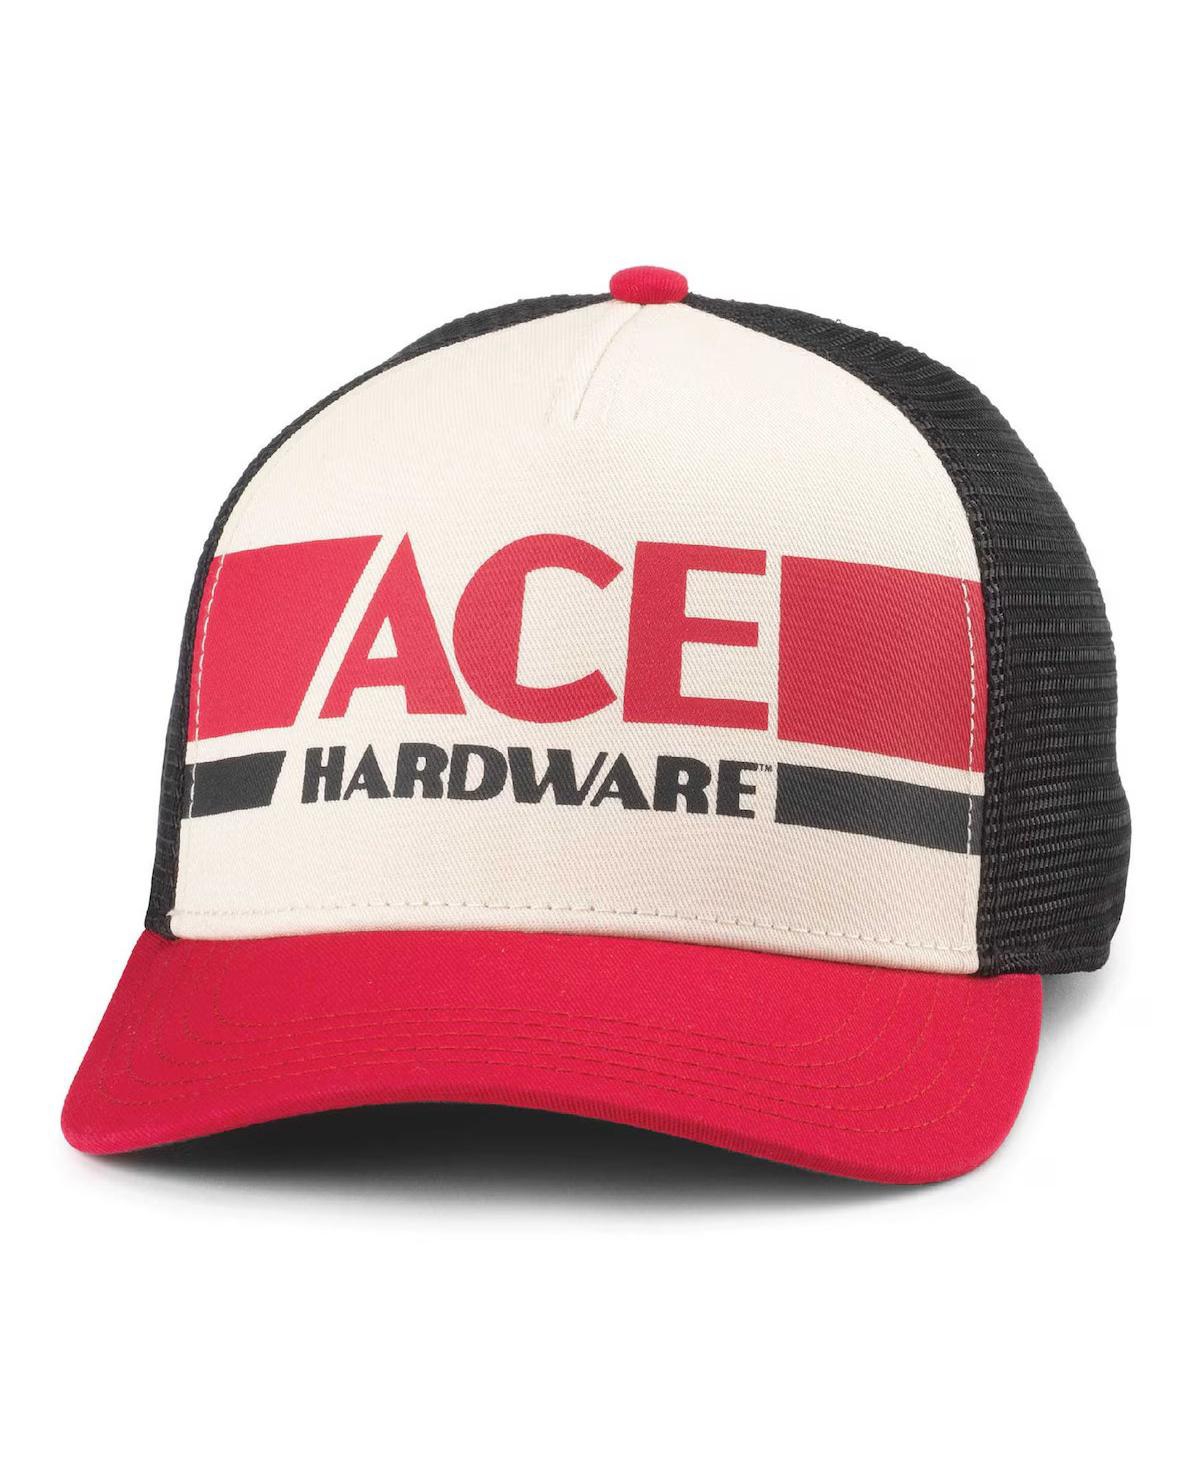 American Needle Men's Natural/red Ace Hardware Sinclair Adjustable Hat